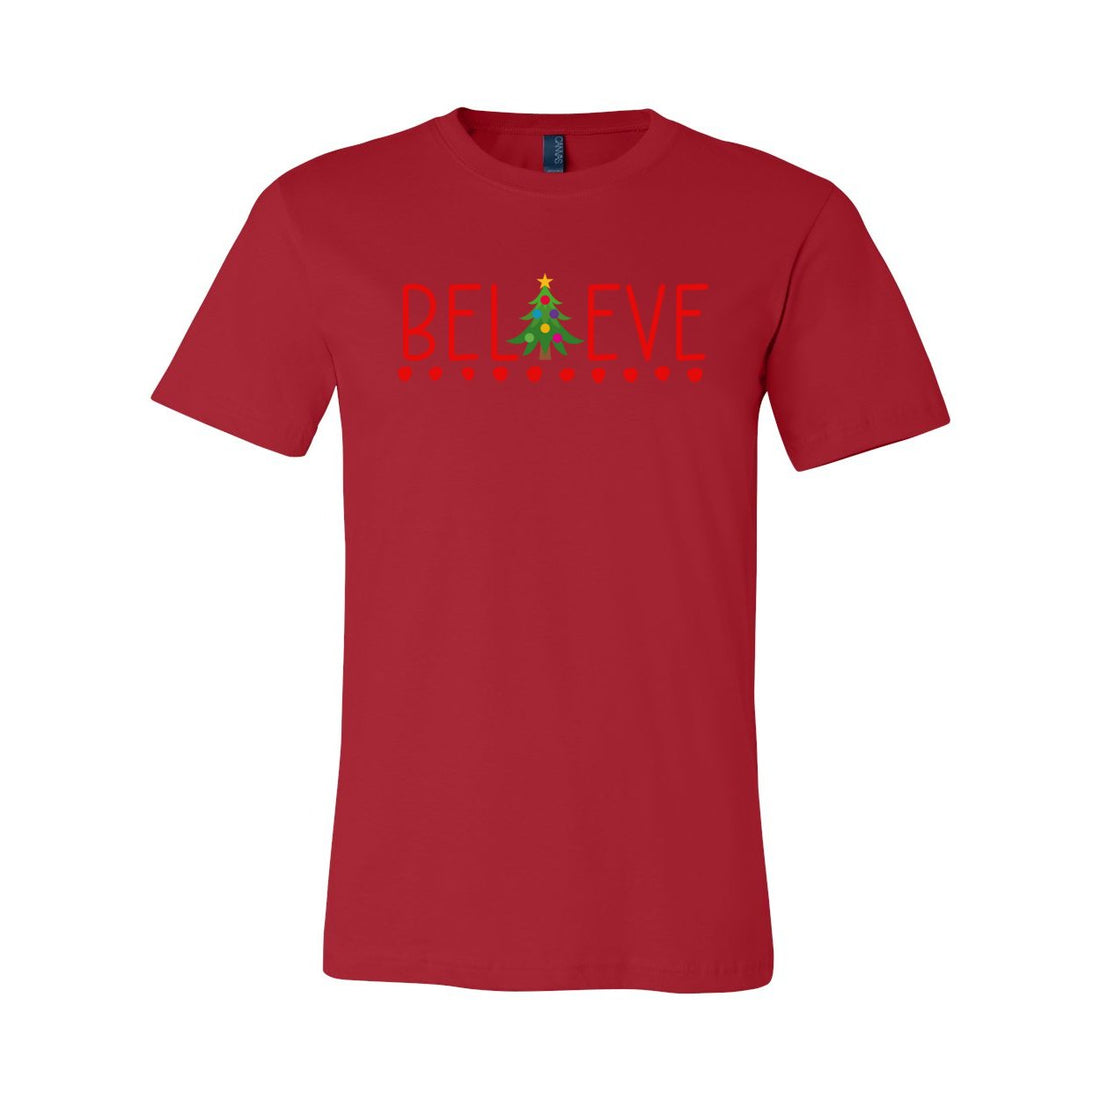 Believe In Christmas - T-Shirts - Positively Sassy - Believe In Christmas